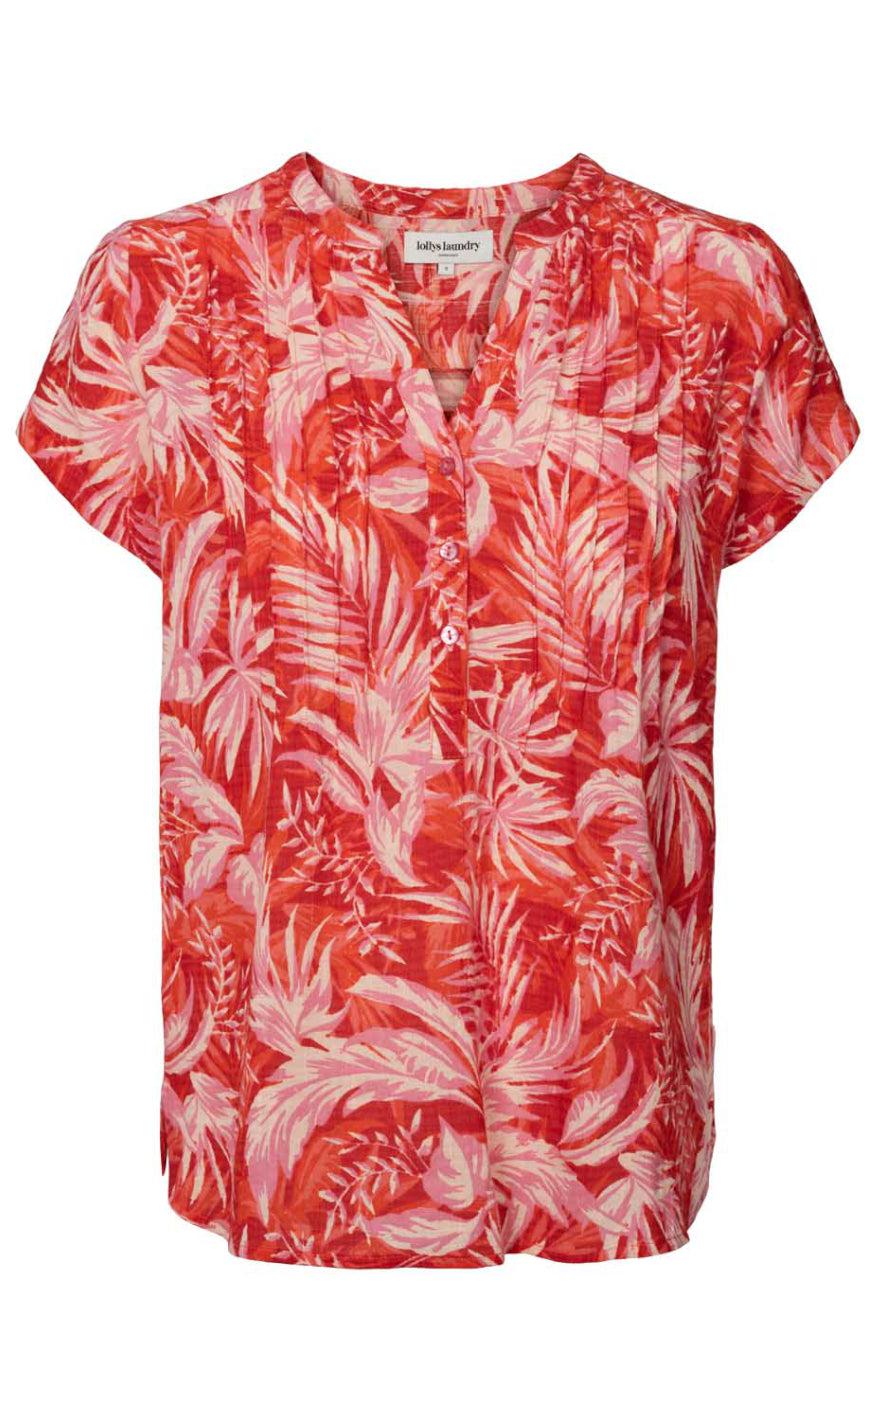 4: Lollys Laundry Bluse - Heather - Red